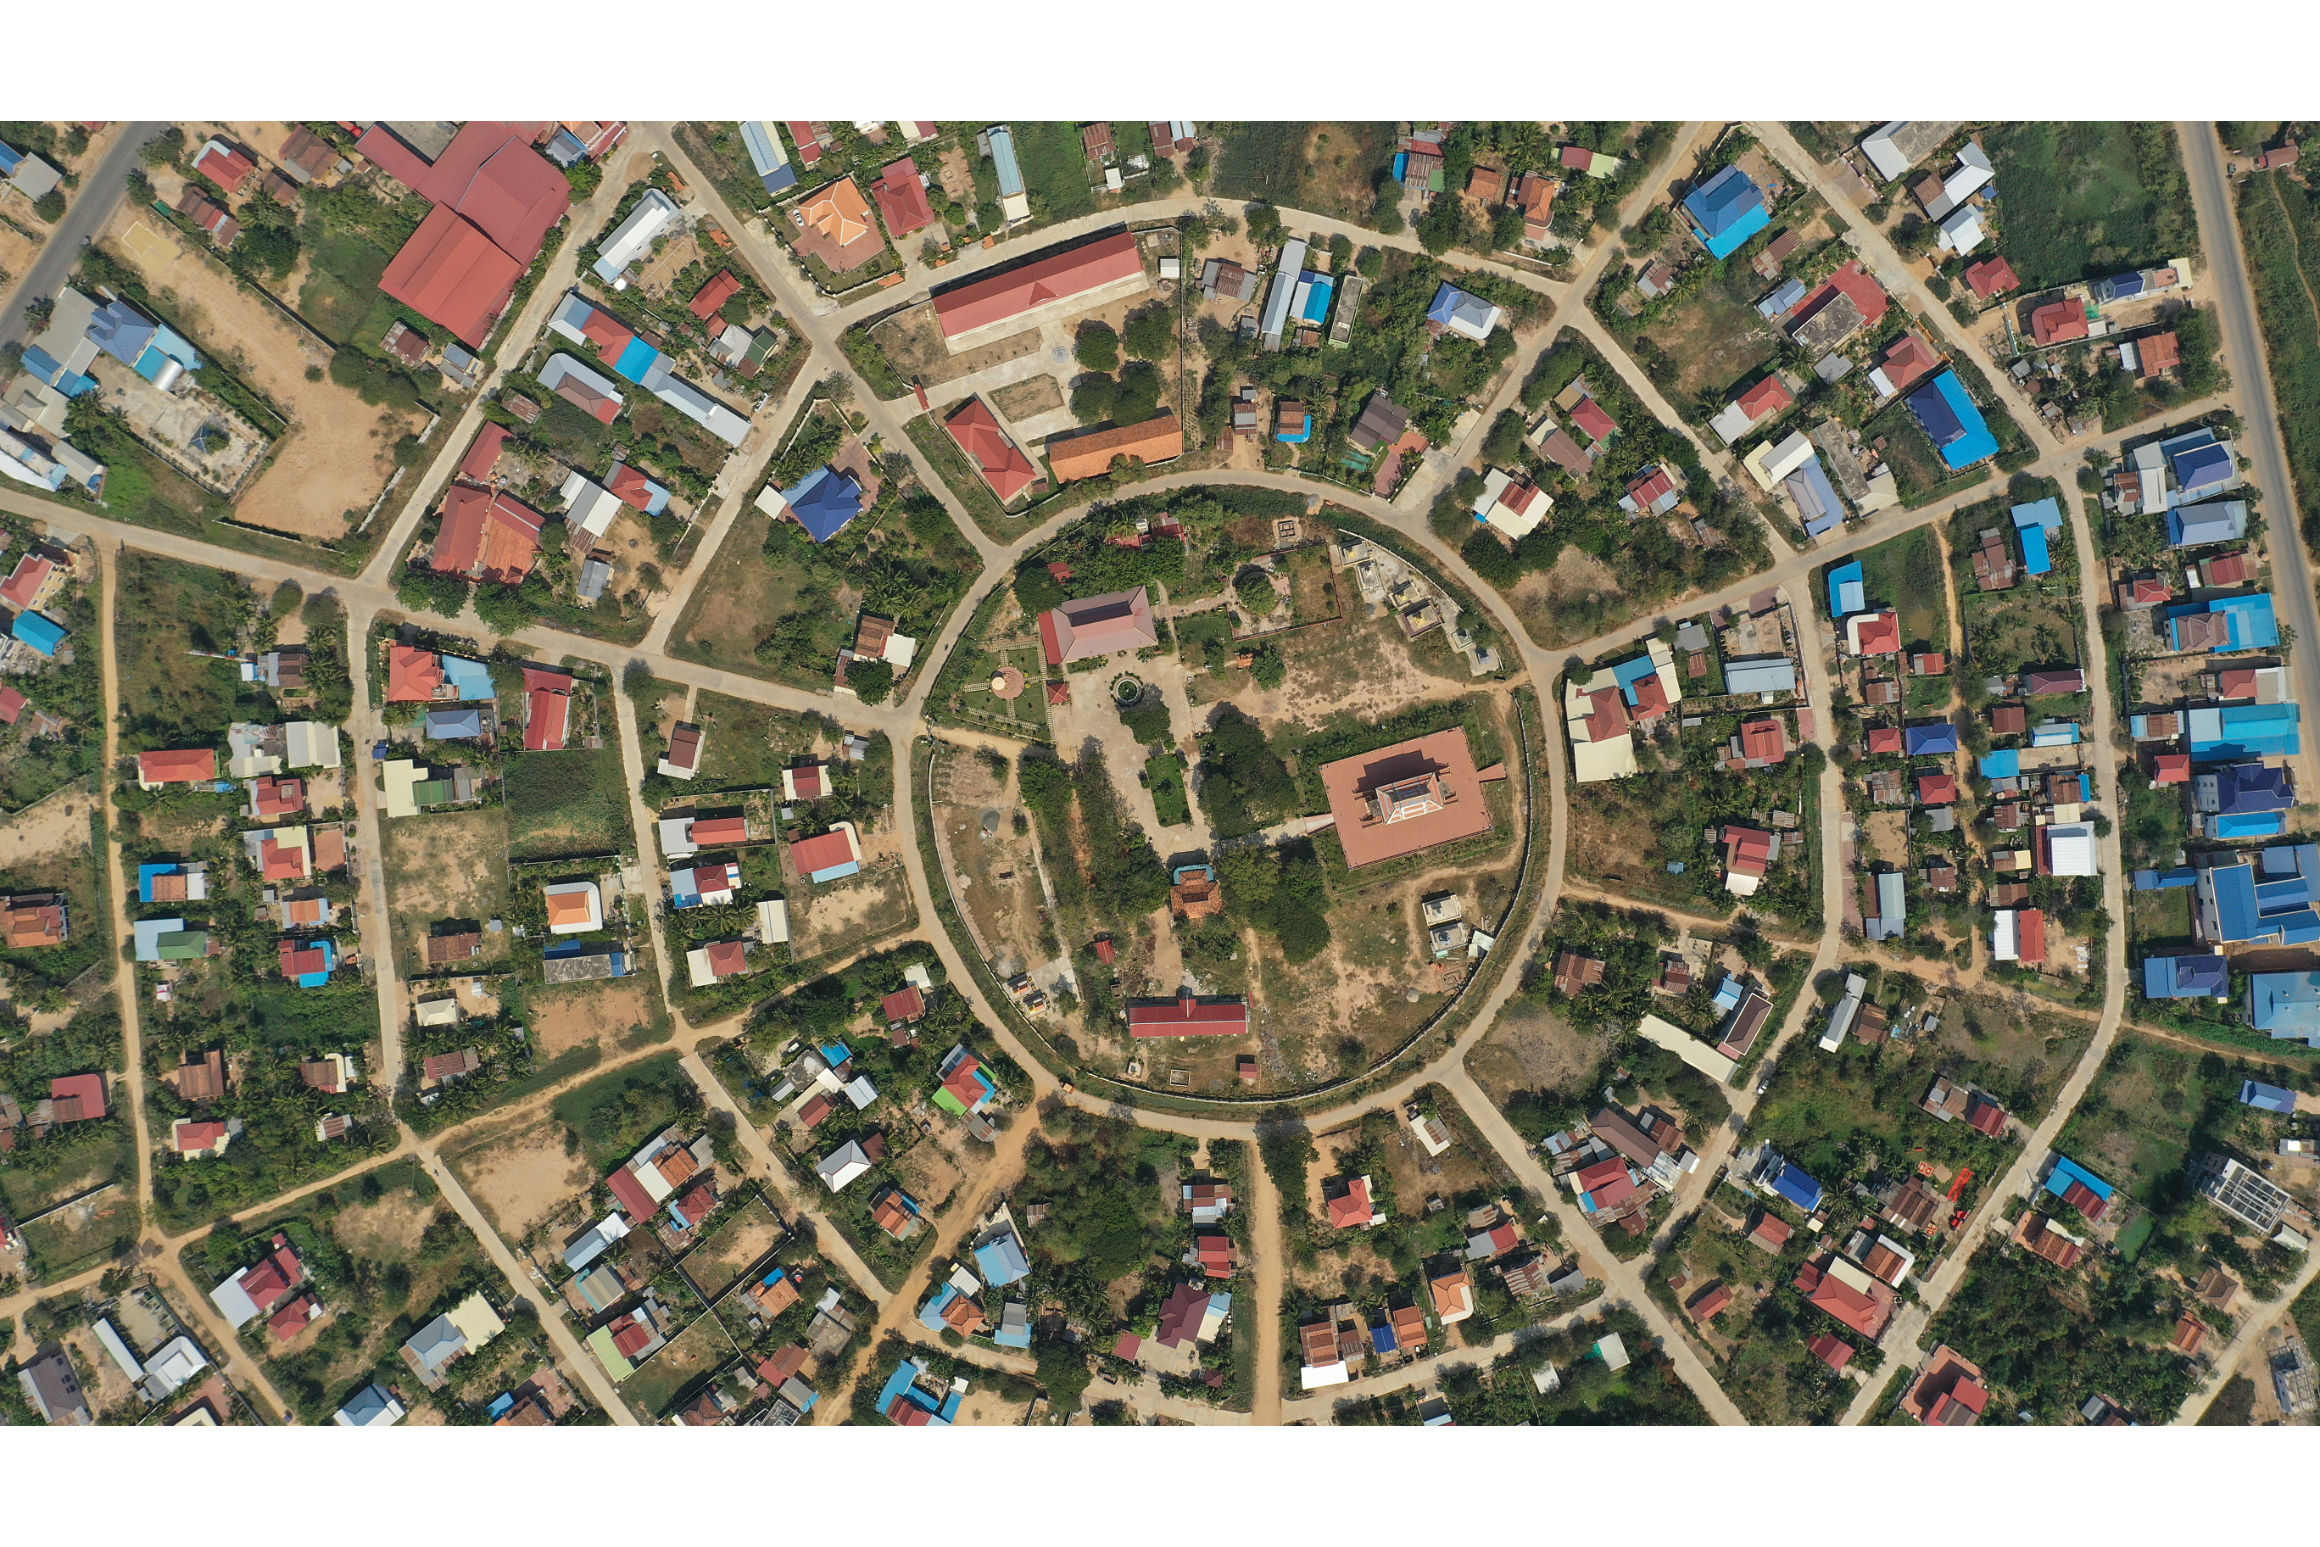 Aerial Drone Images - Prey Veng, Cambodia